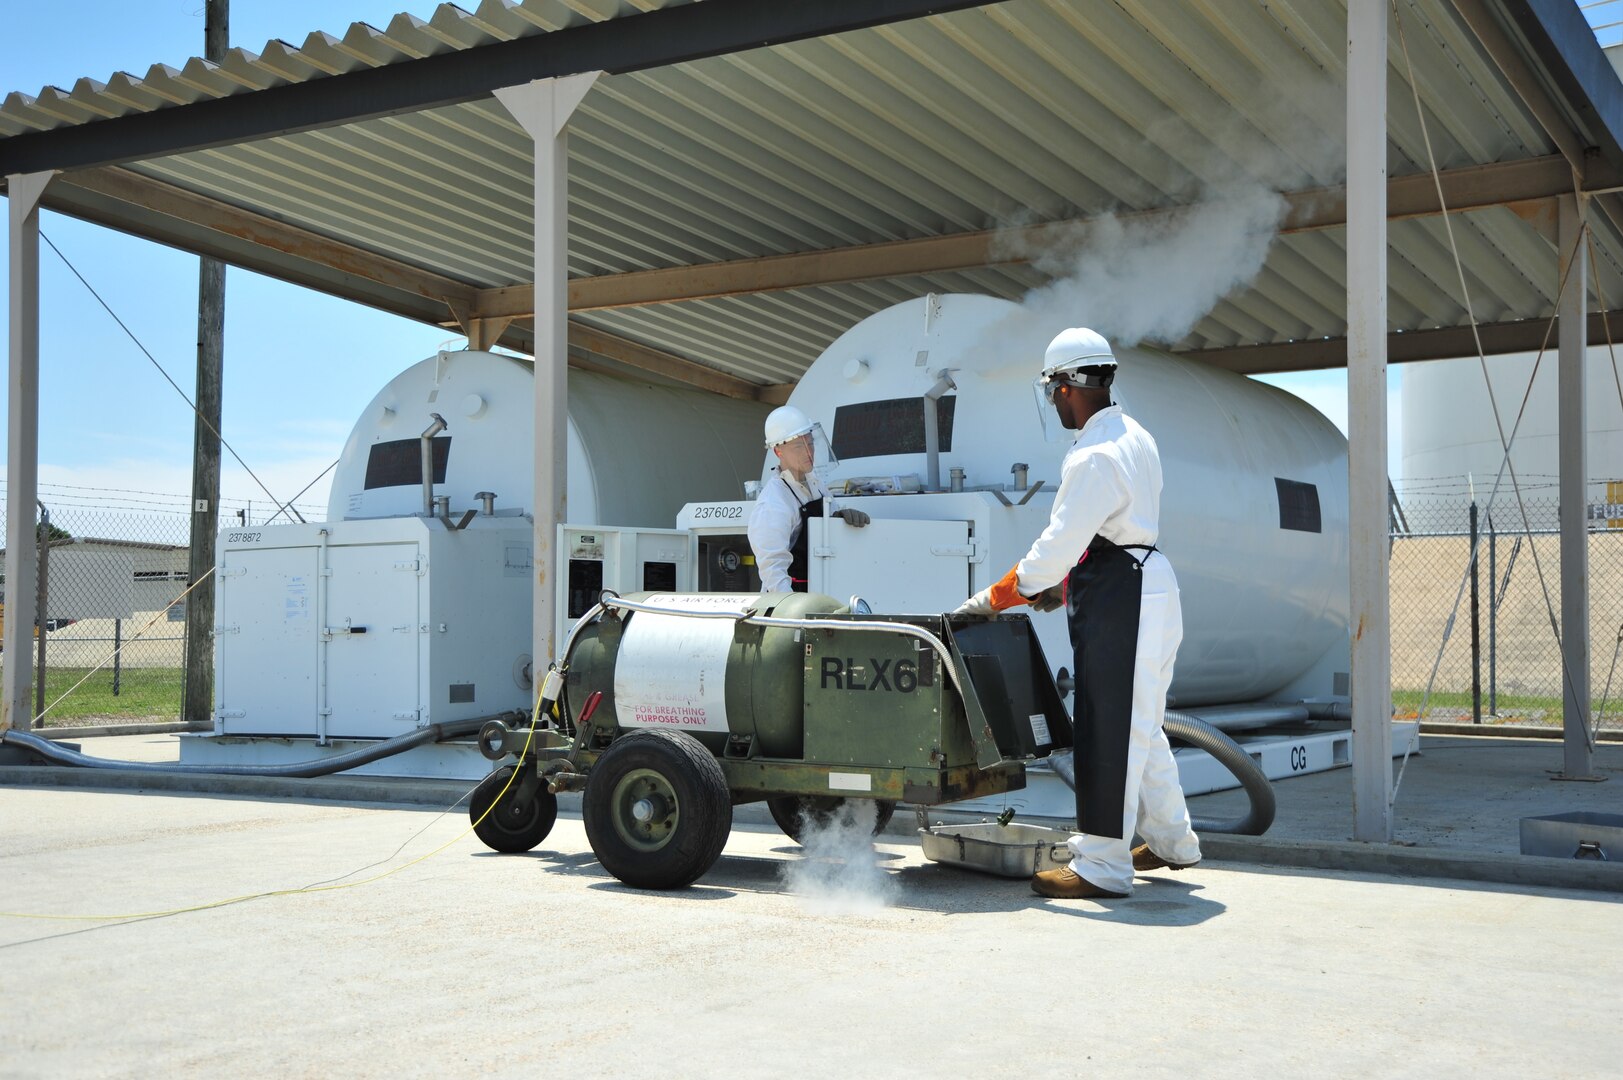 Fuel specialists of the 403rd Mission Support Group at Keesler Air Force Base put their science based training into action every day as they supply petroleum products to the 403rd Wing C-130Js, weapons systems, and ground vehicles.